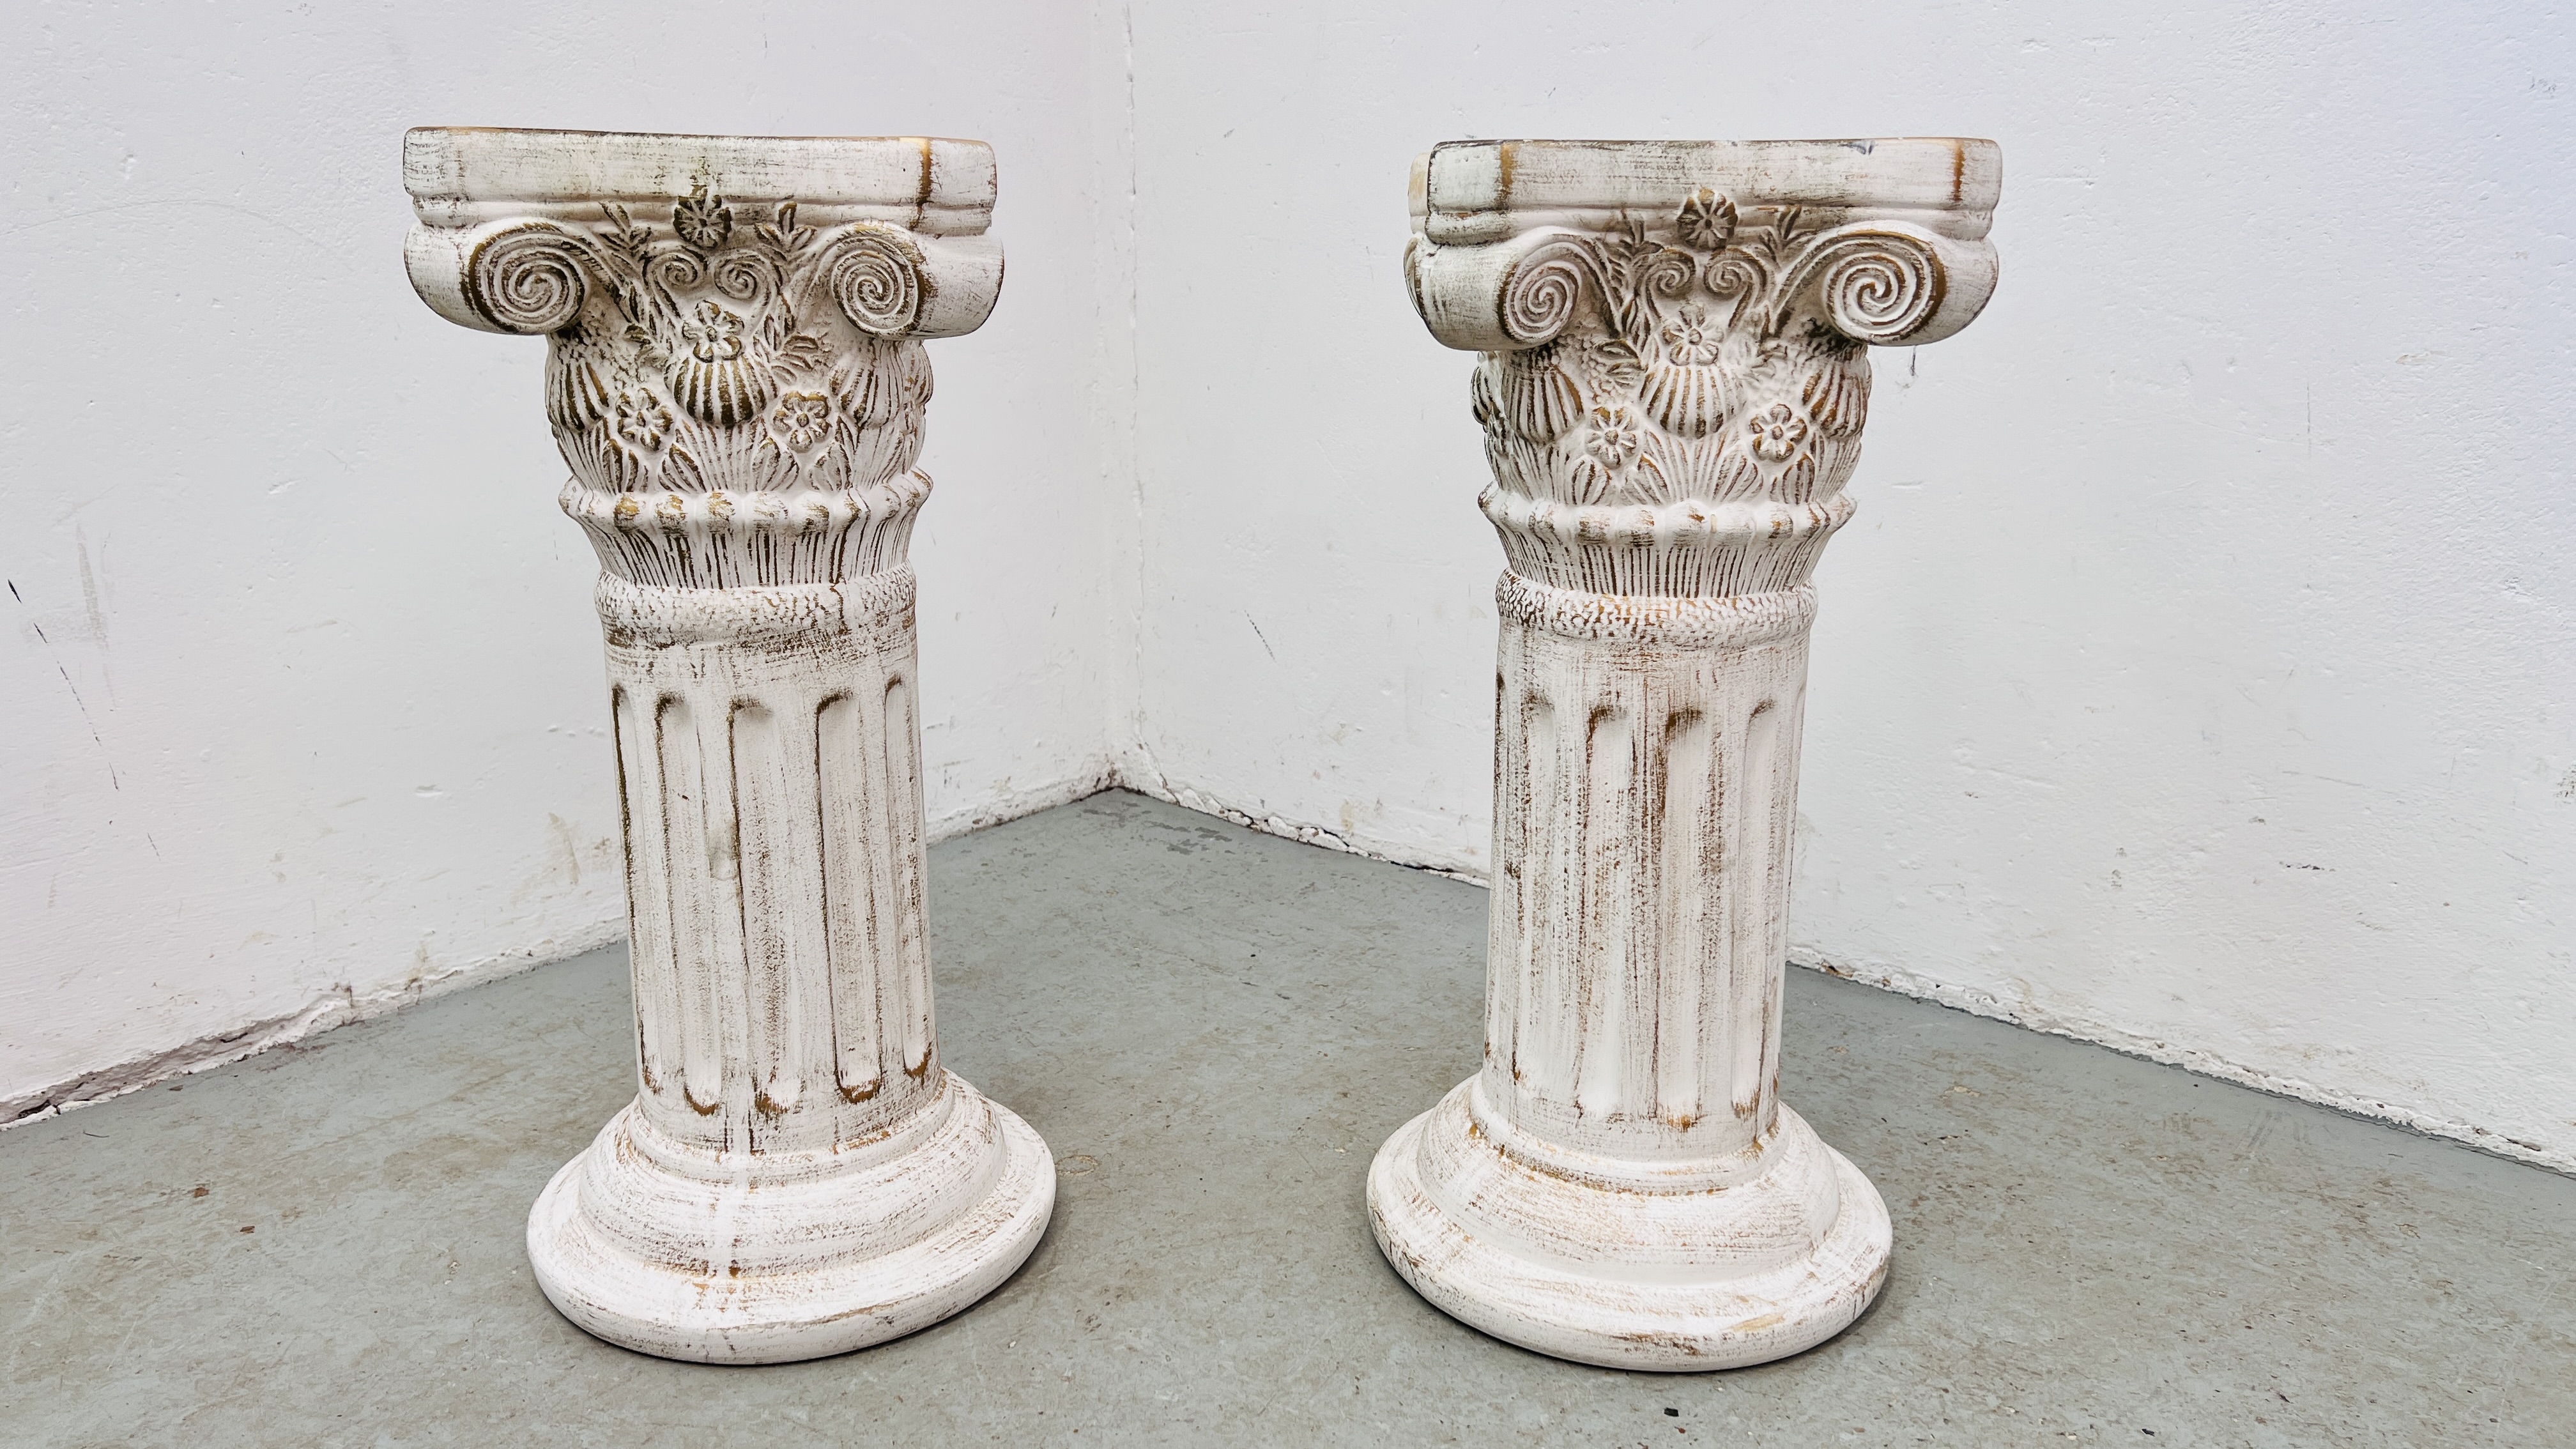 A PAIR OF REPRODUCTION COLUMN PEDESTAL STANDS, H 61CM. - Image 9 of 9